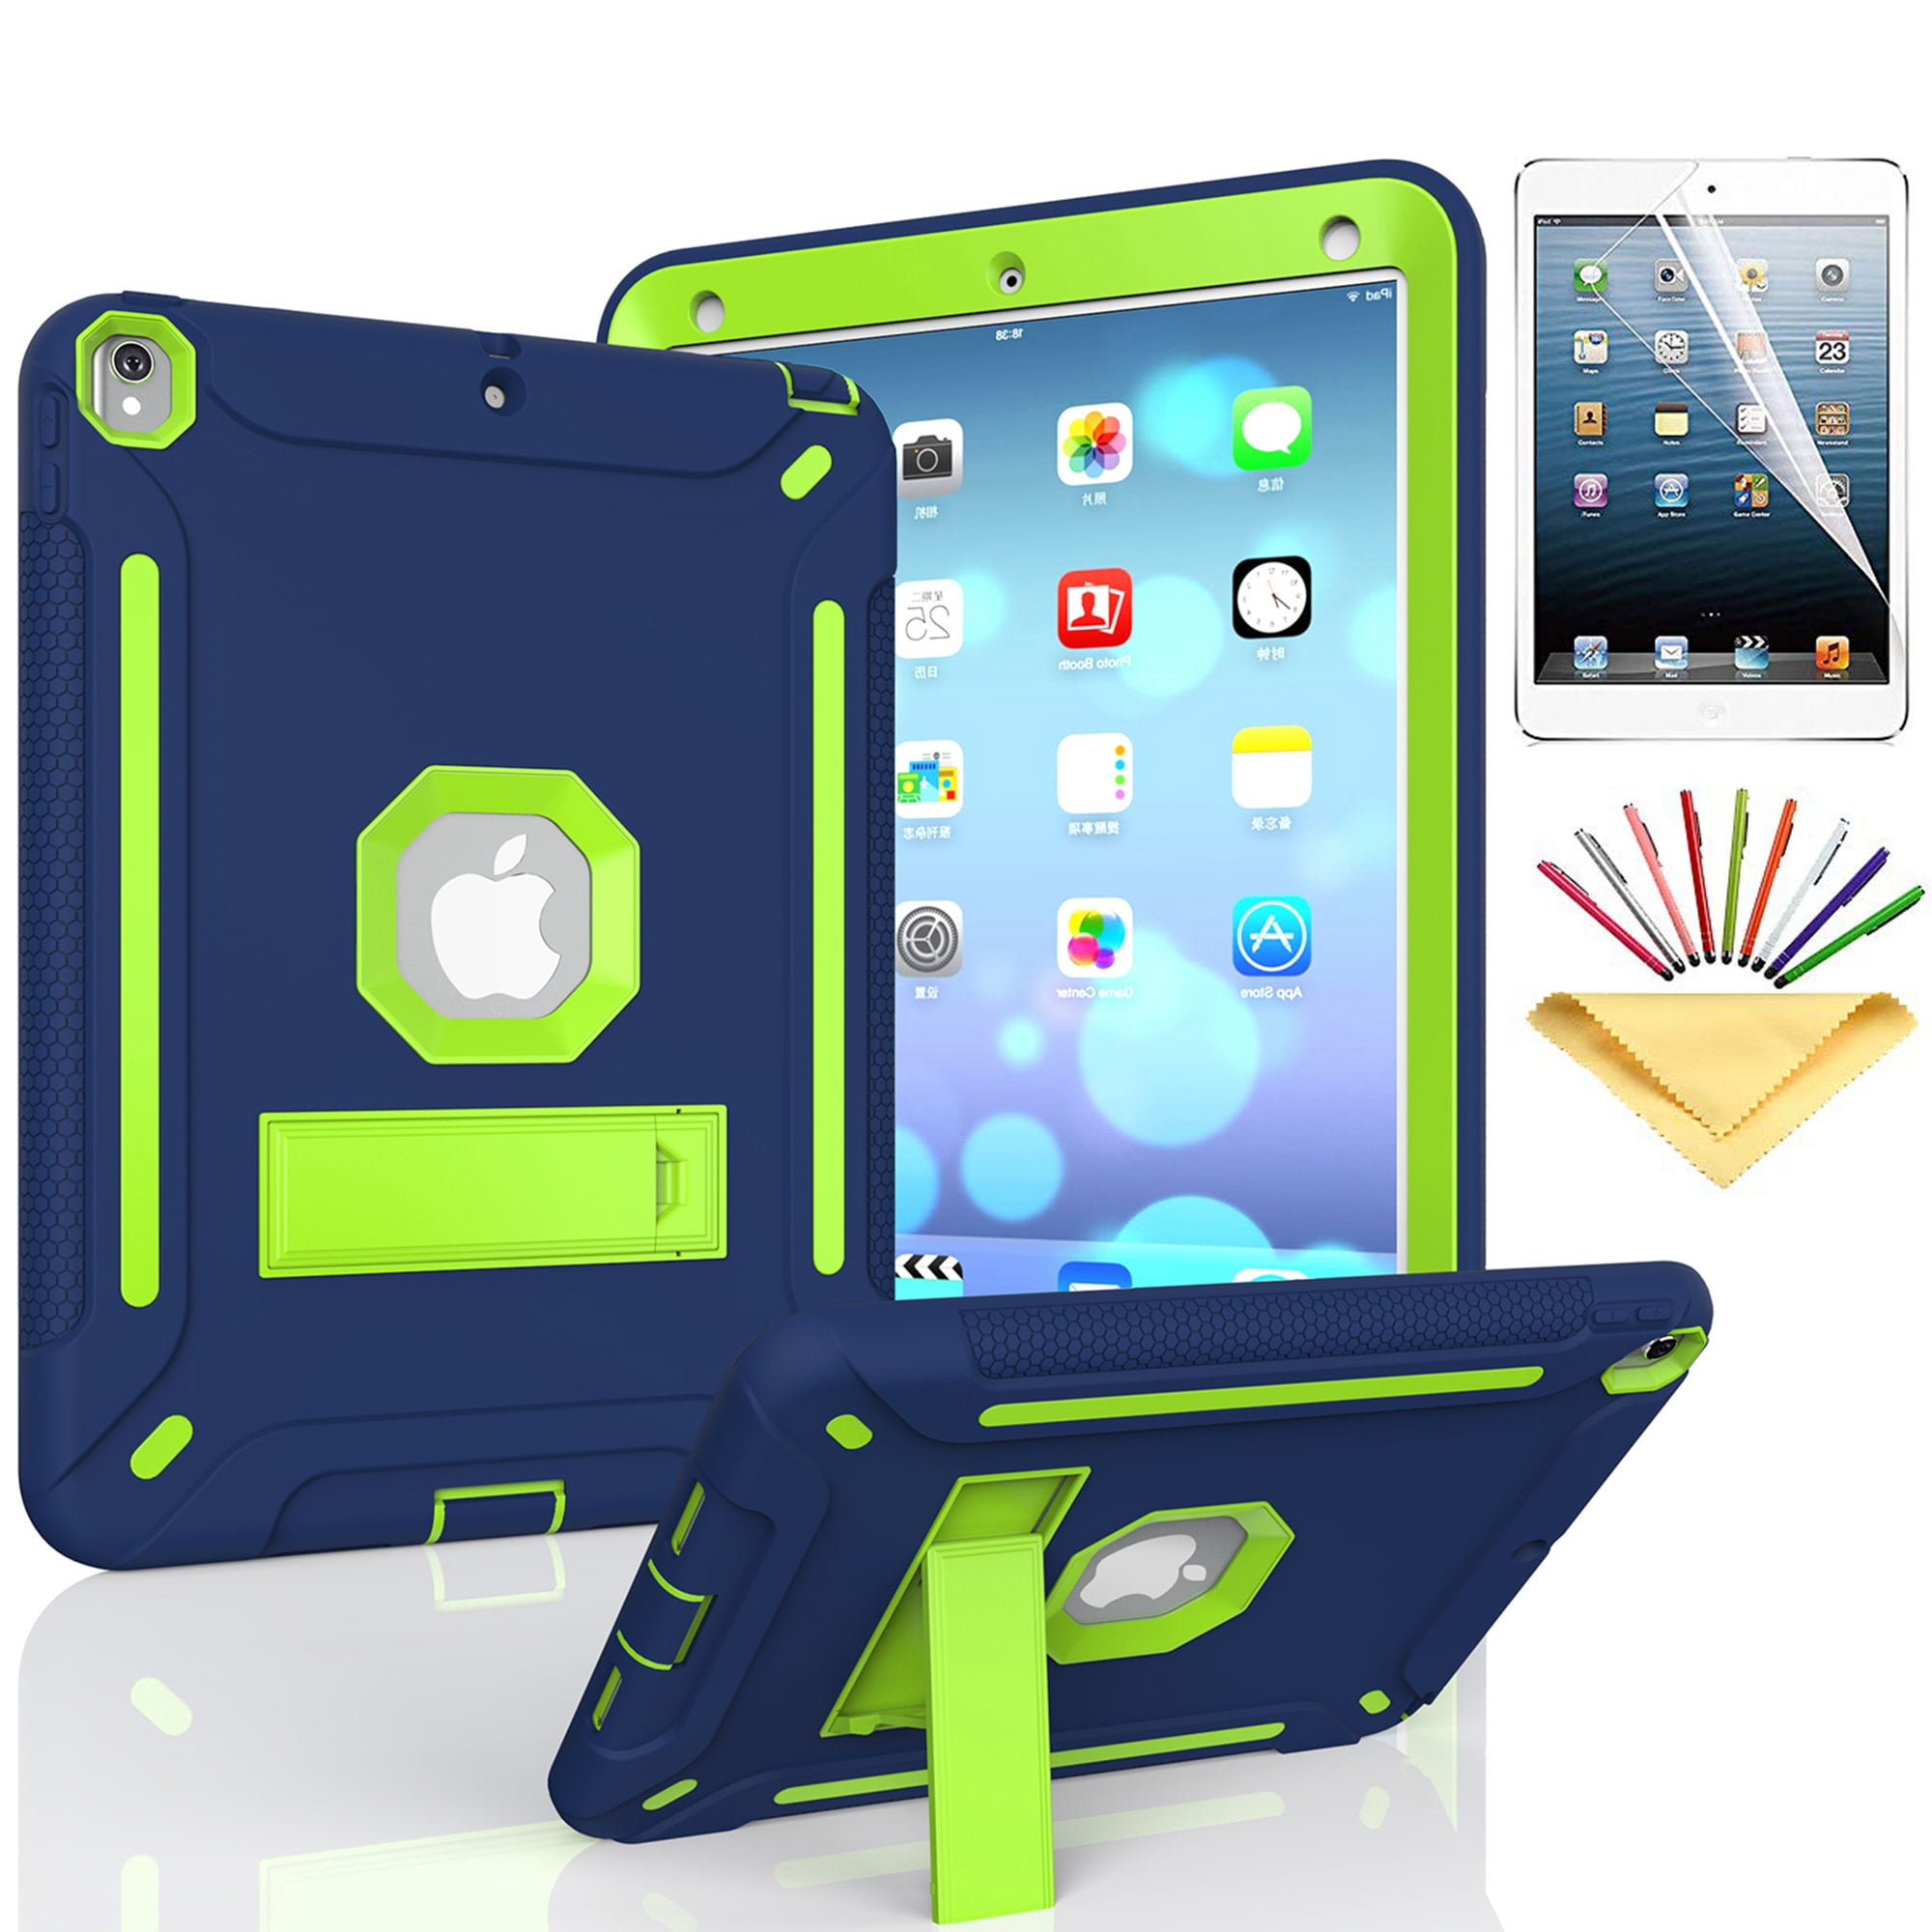 iPad Air 2 Case with Soft Screen Protector, Dteck Heavy Duty Shockproof ...